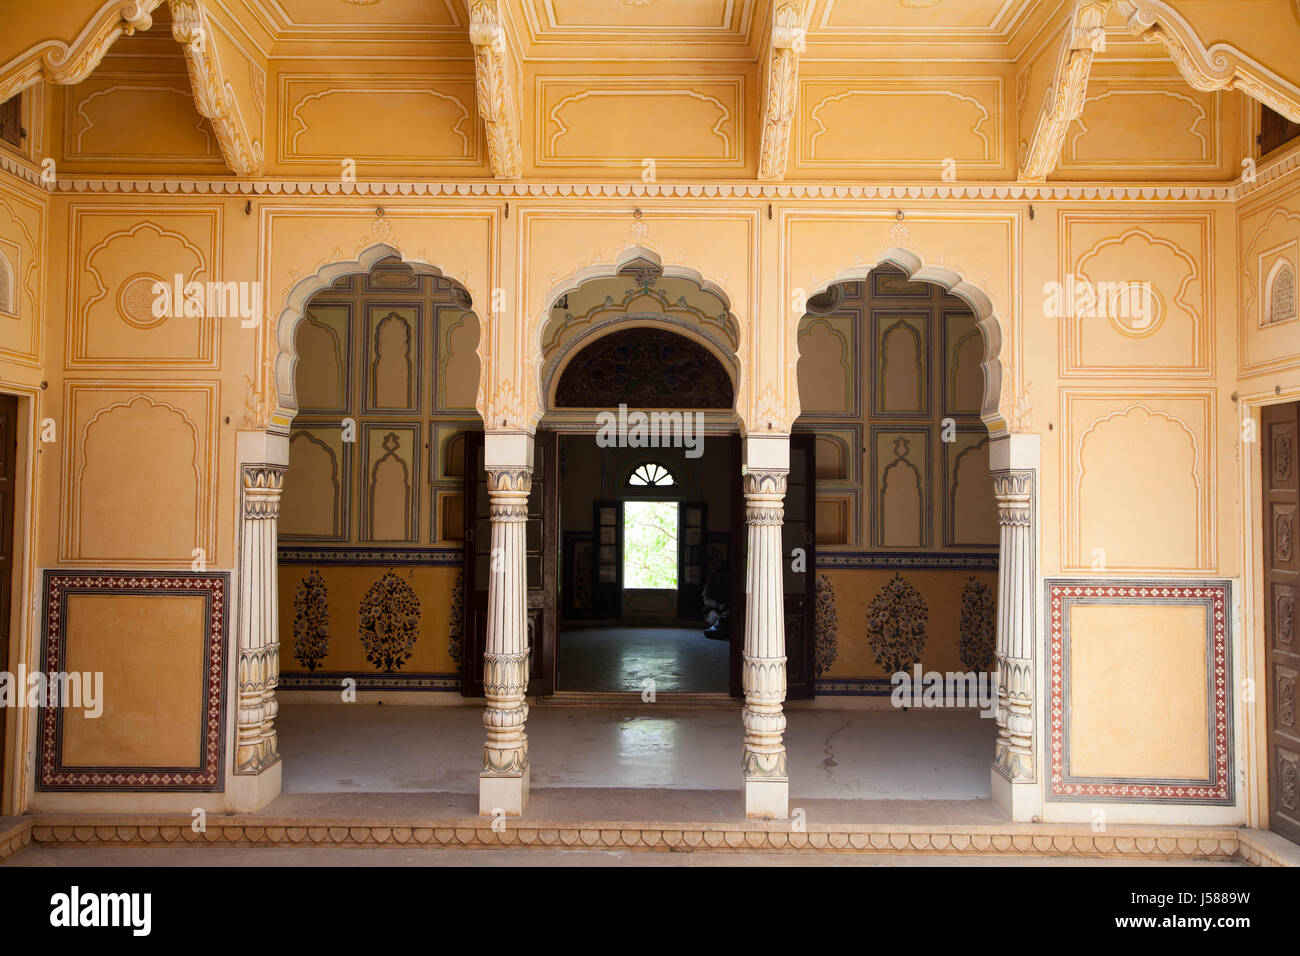 Halls in Nahargarh Fort, near Jaipur in the Indian state of Rajasthan. Stock Photo